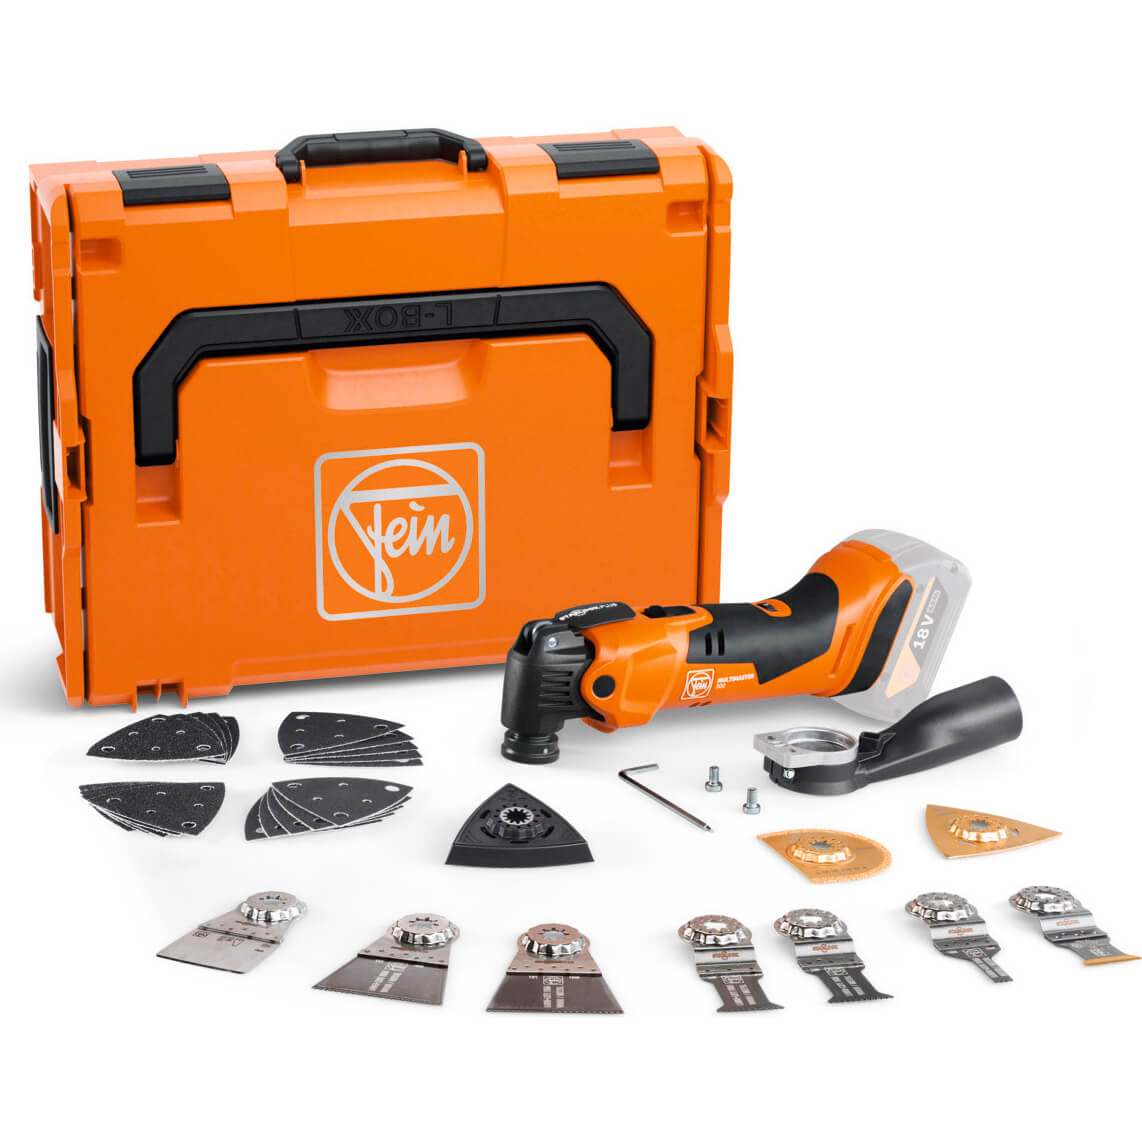 Fein AMM 500 Plus AMPShare 18v Cordless MultiMaster Multi Tool No Batteries No Charger Case & Accessories